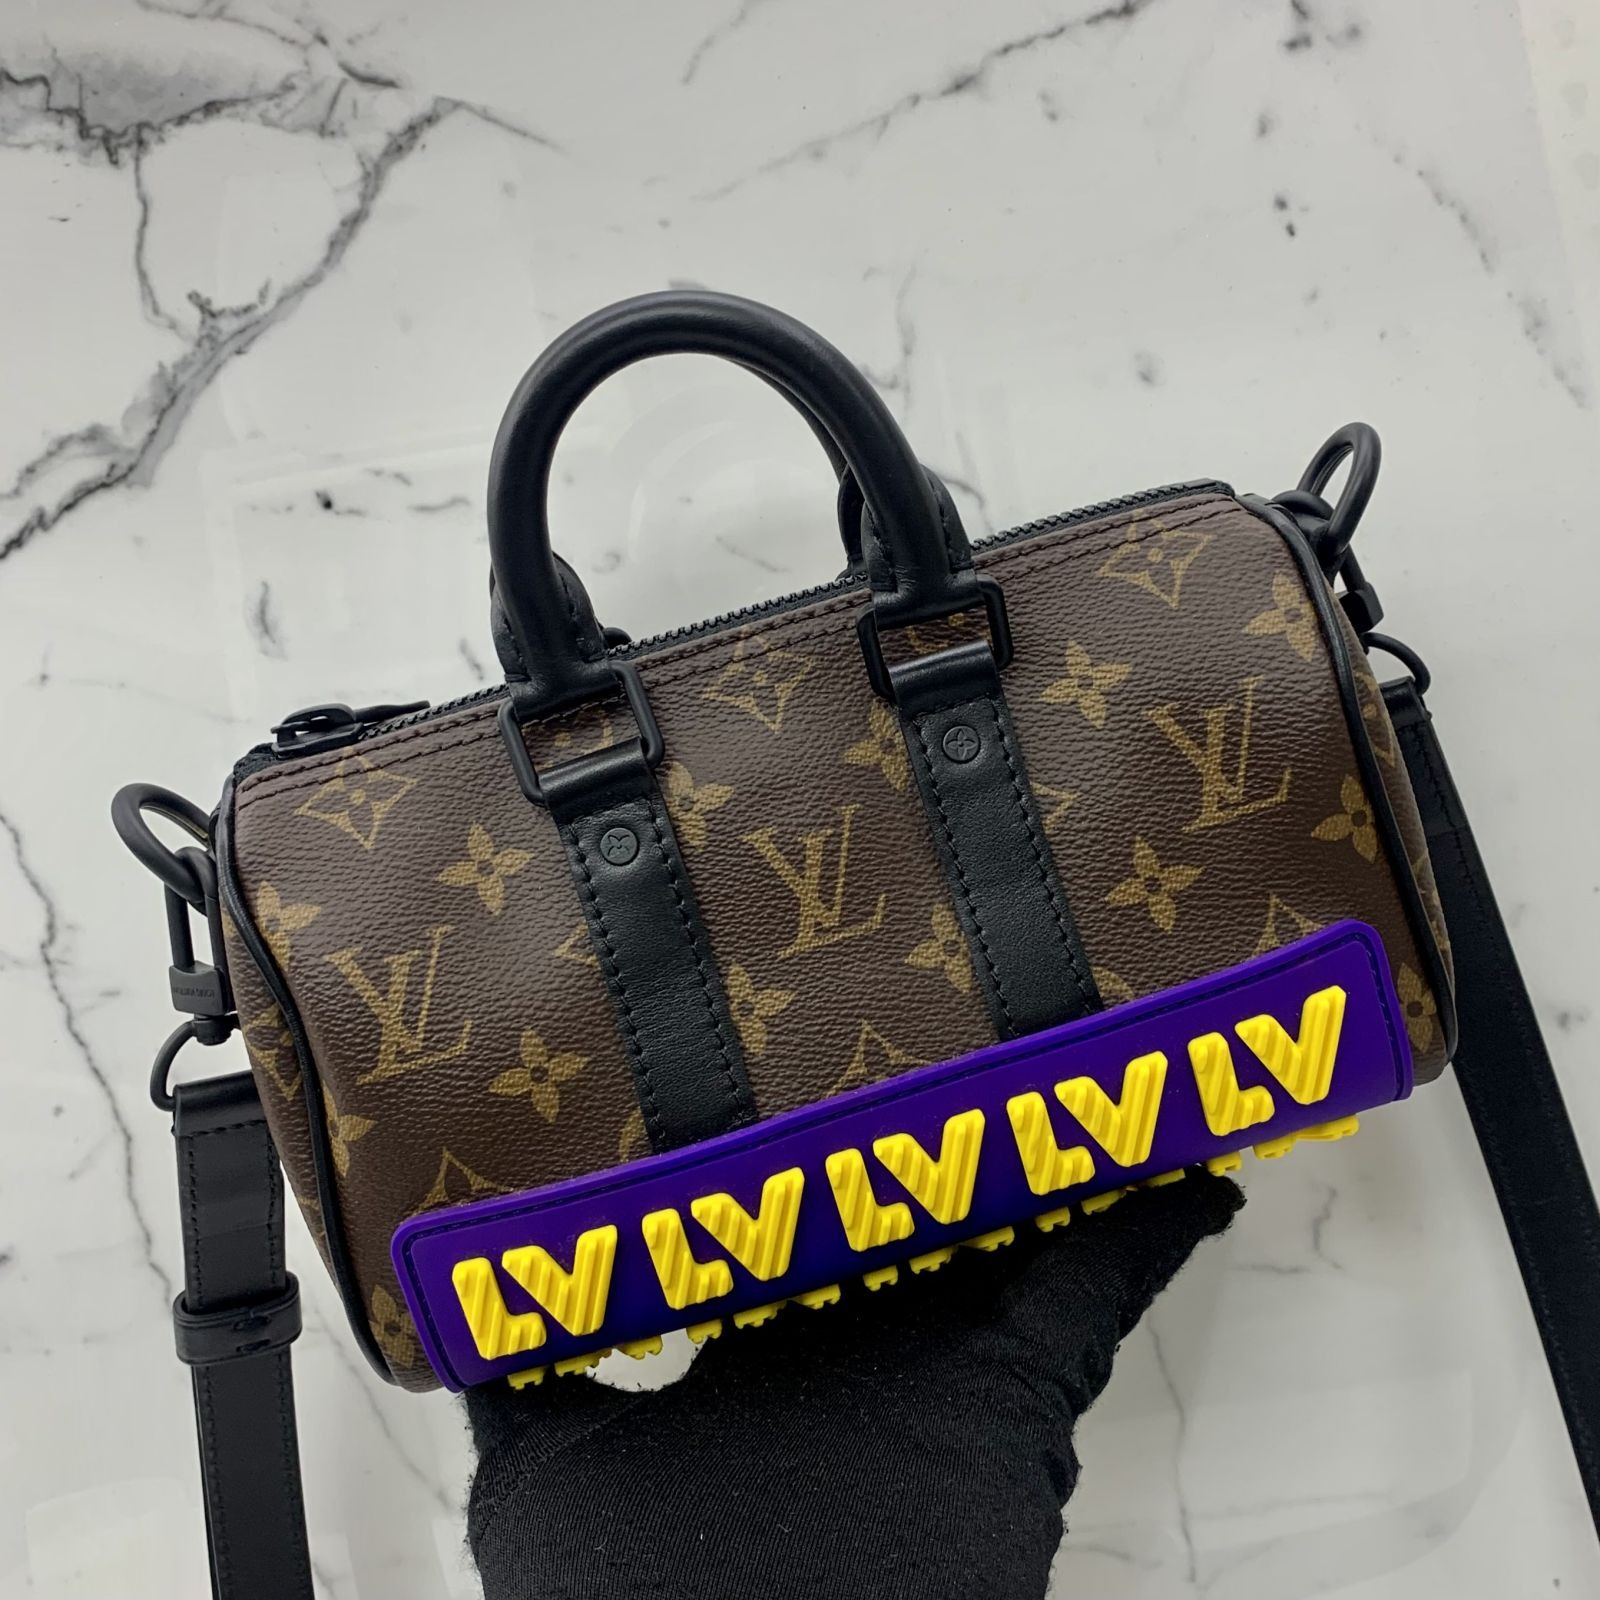 M45788 Louis Vuitton Monogram Coated LV Rubber Keepall XS